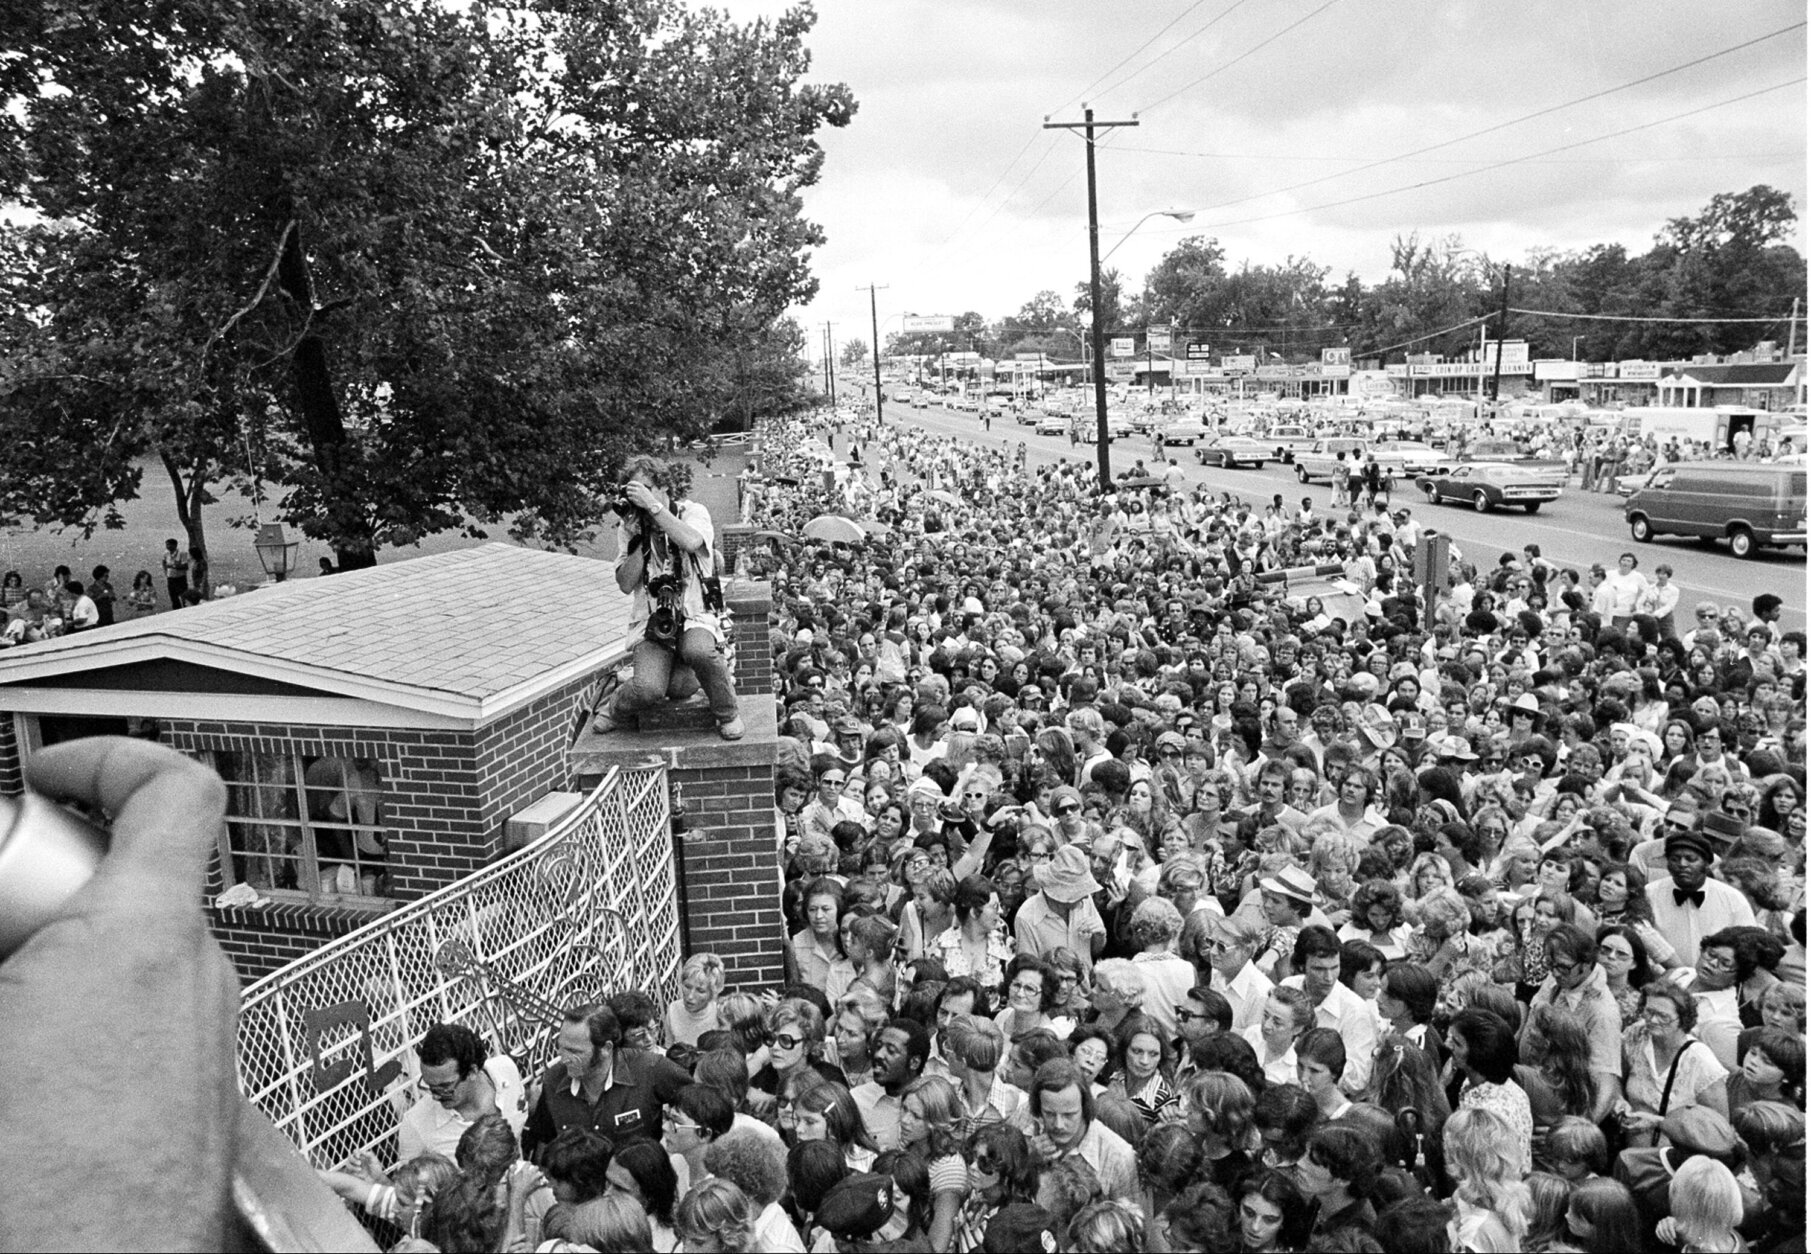 Hundreds of people wait outside the late Elvis Presley's Graceland mansion before the gates are opened for the public to view the body of the rock and roll singer in Memphis, Tenn., Aug. 17, 1977.  (AP Photo)